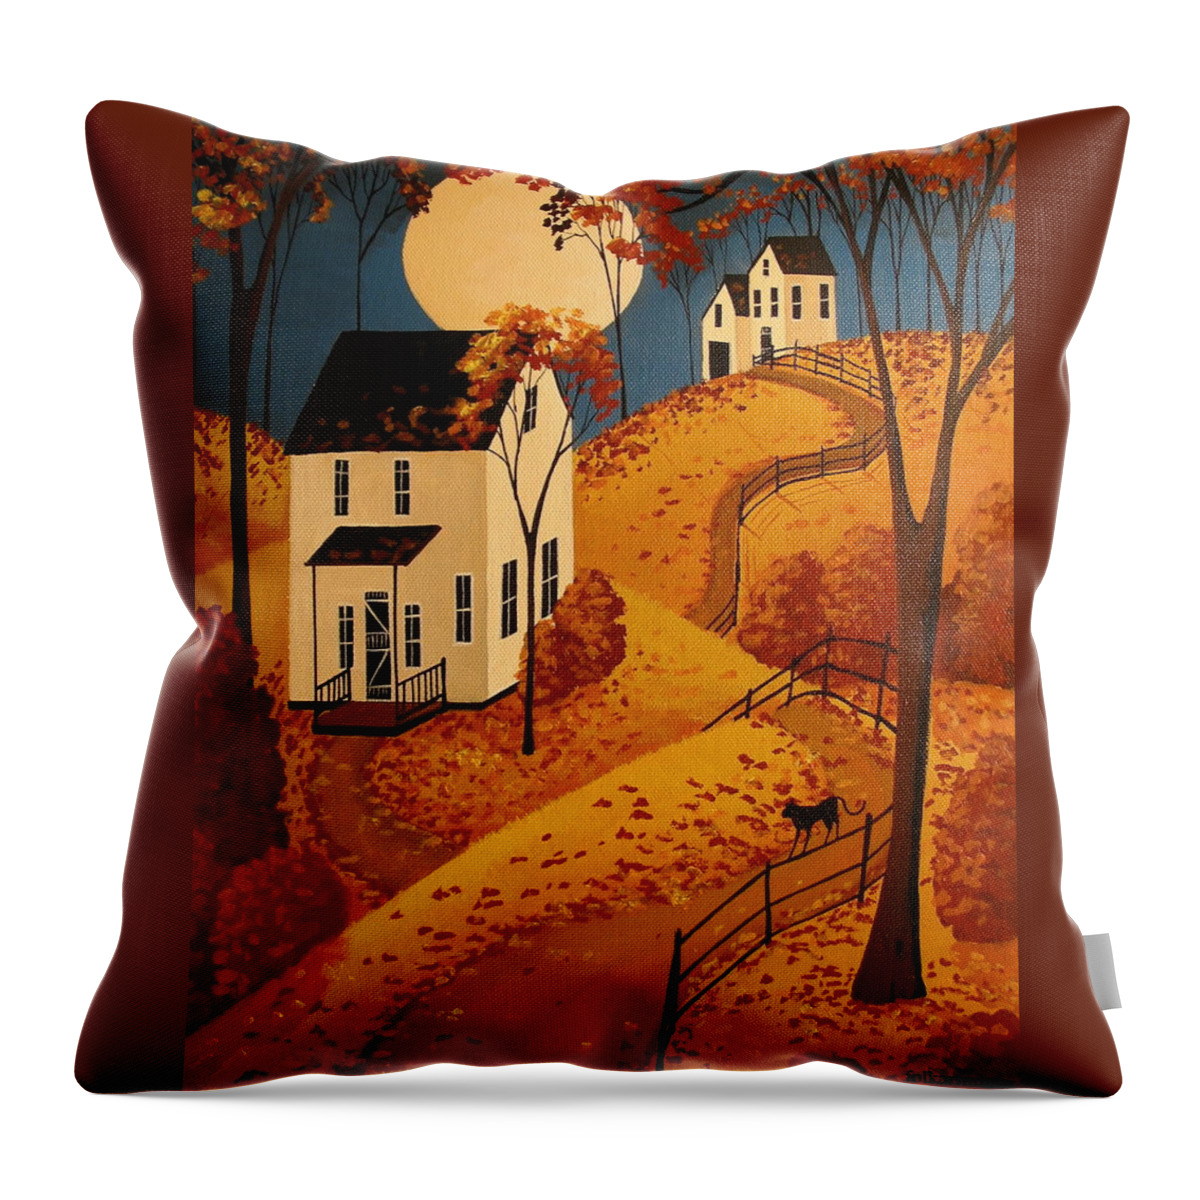 Folk Art Throw Pillow featuring the painting When Will All The Leaves Fall - folk art by Debbie Criswell